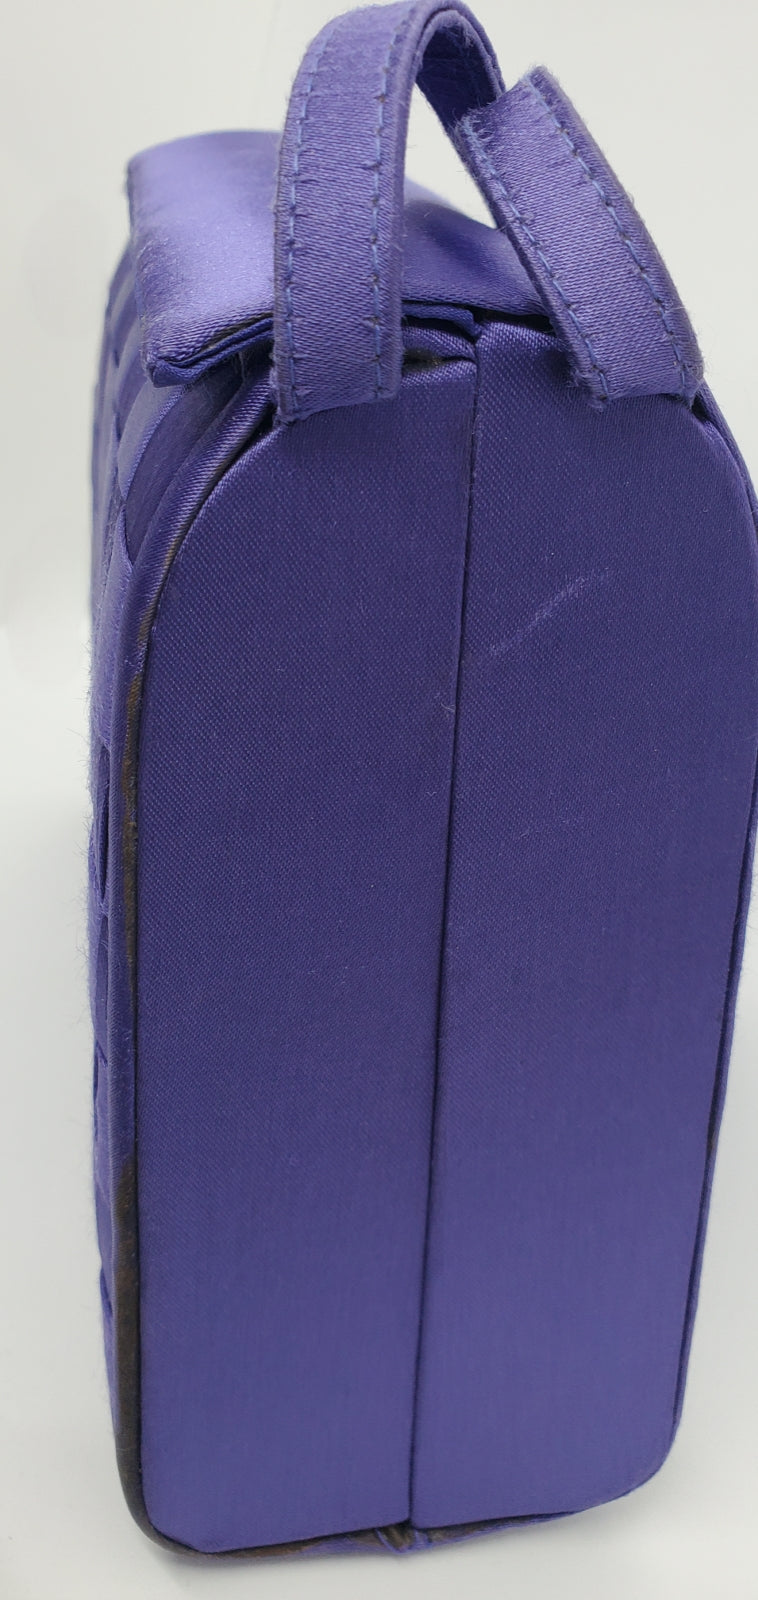 close up side view of purple handbag with woven details